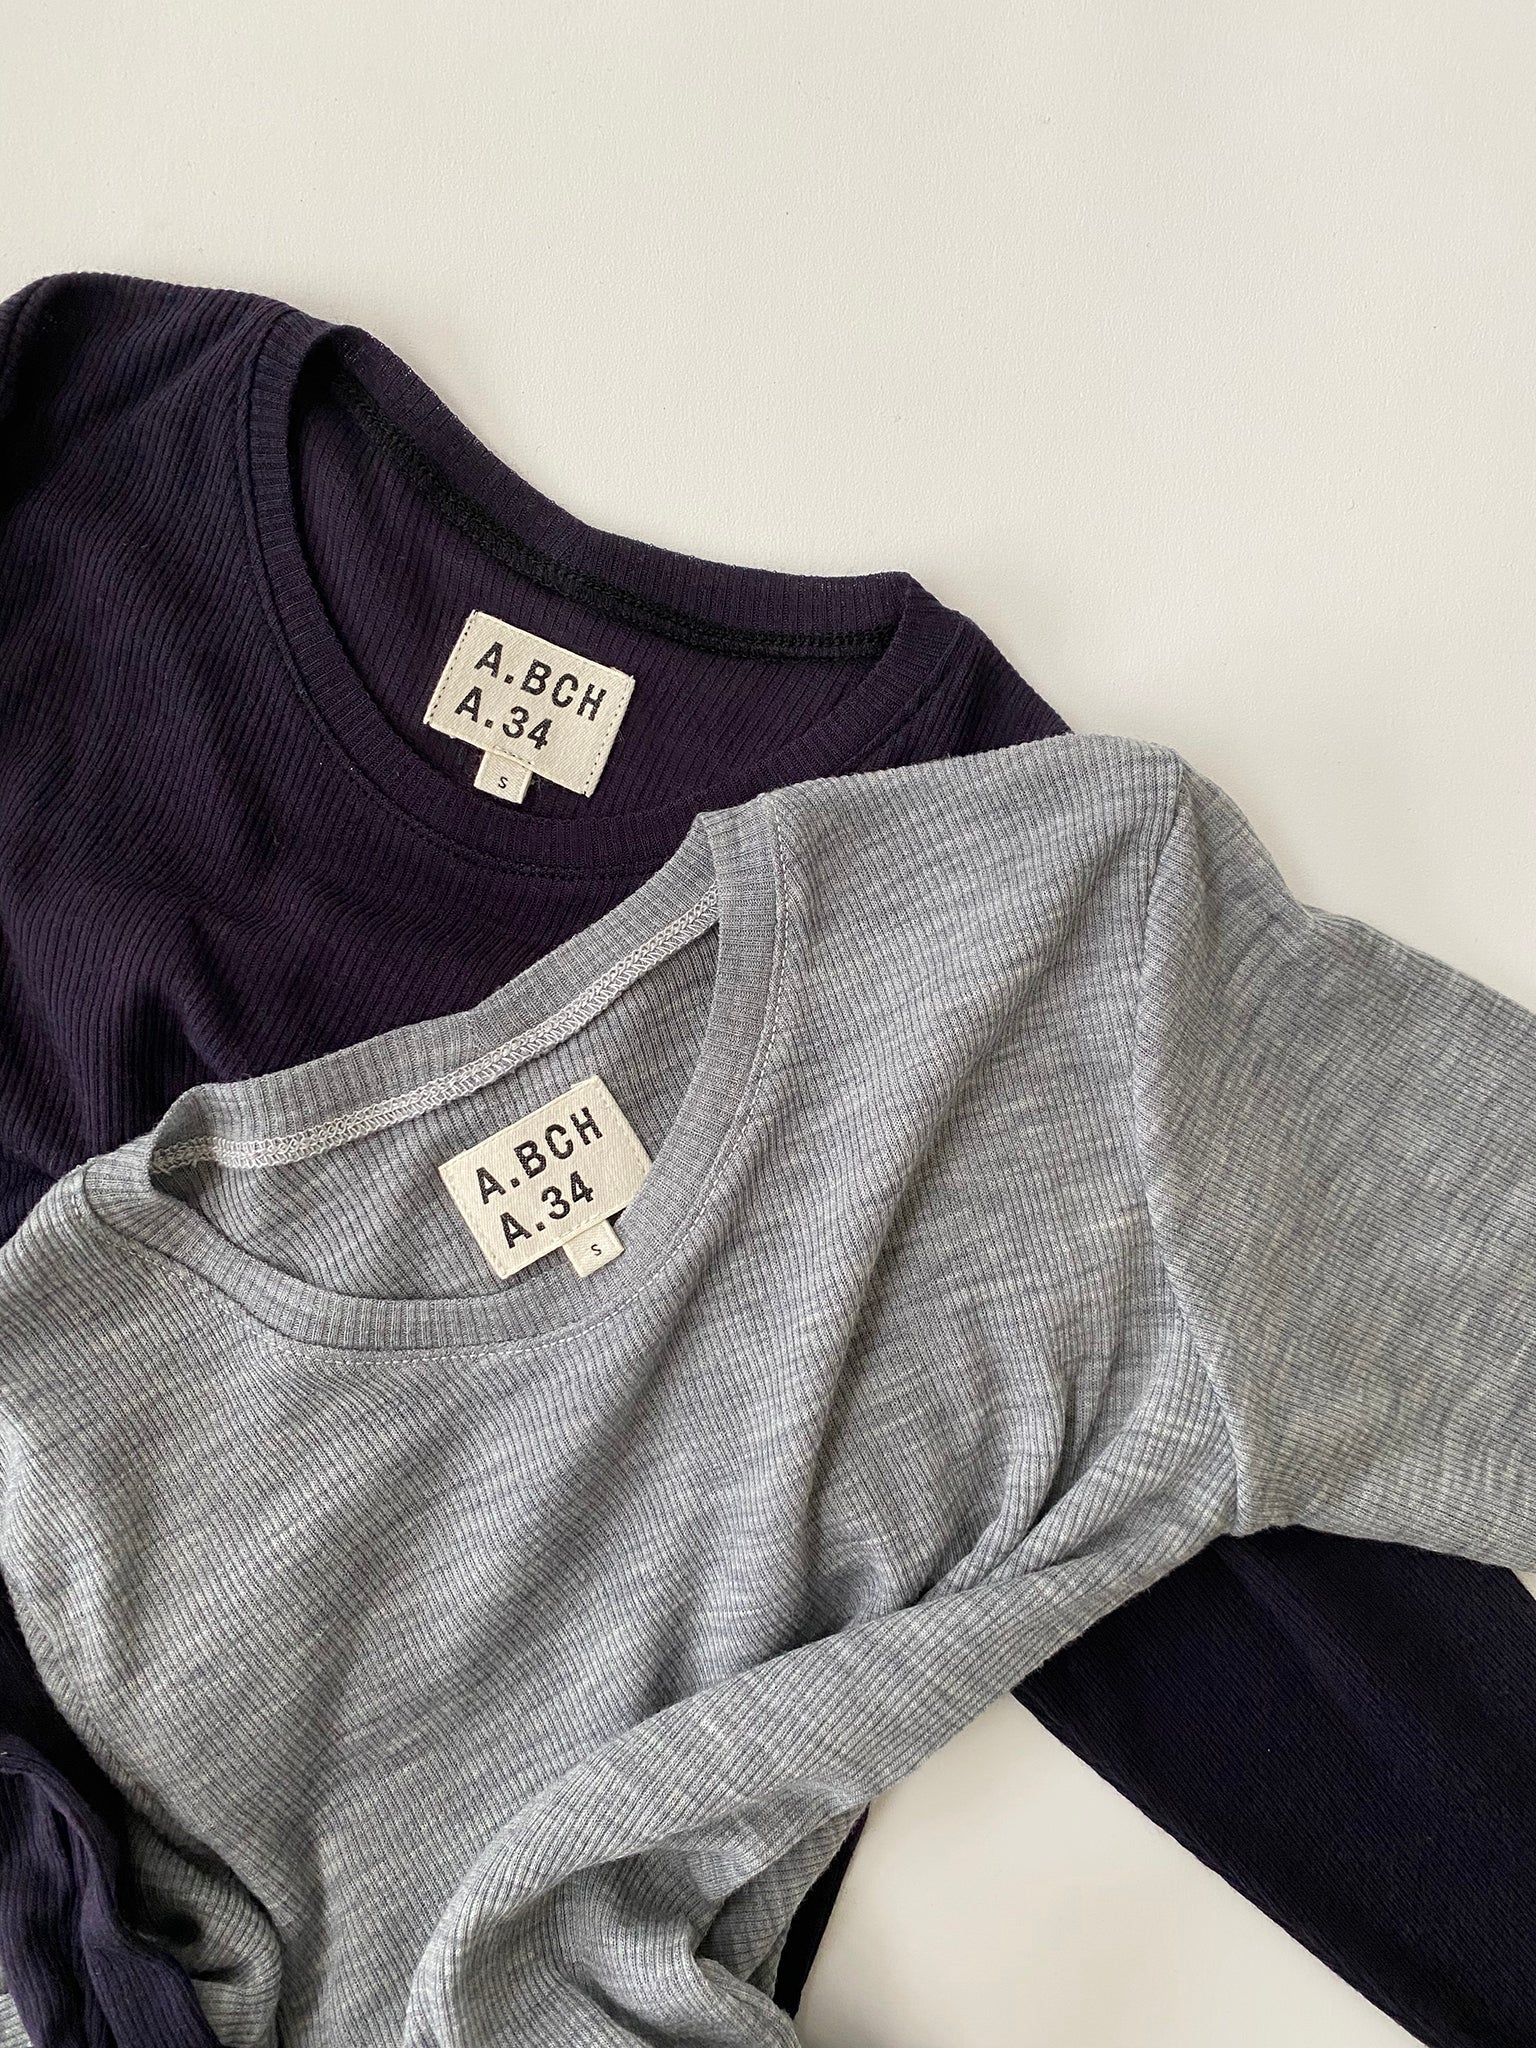 A.BCH A.34 Grey Marle and Aubergine Long Sleeve Thermal T-Shirt in Australian Merino